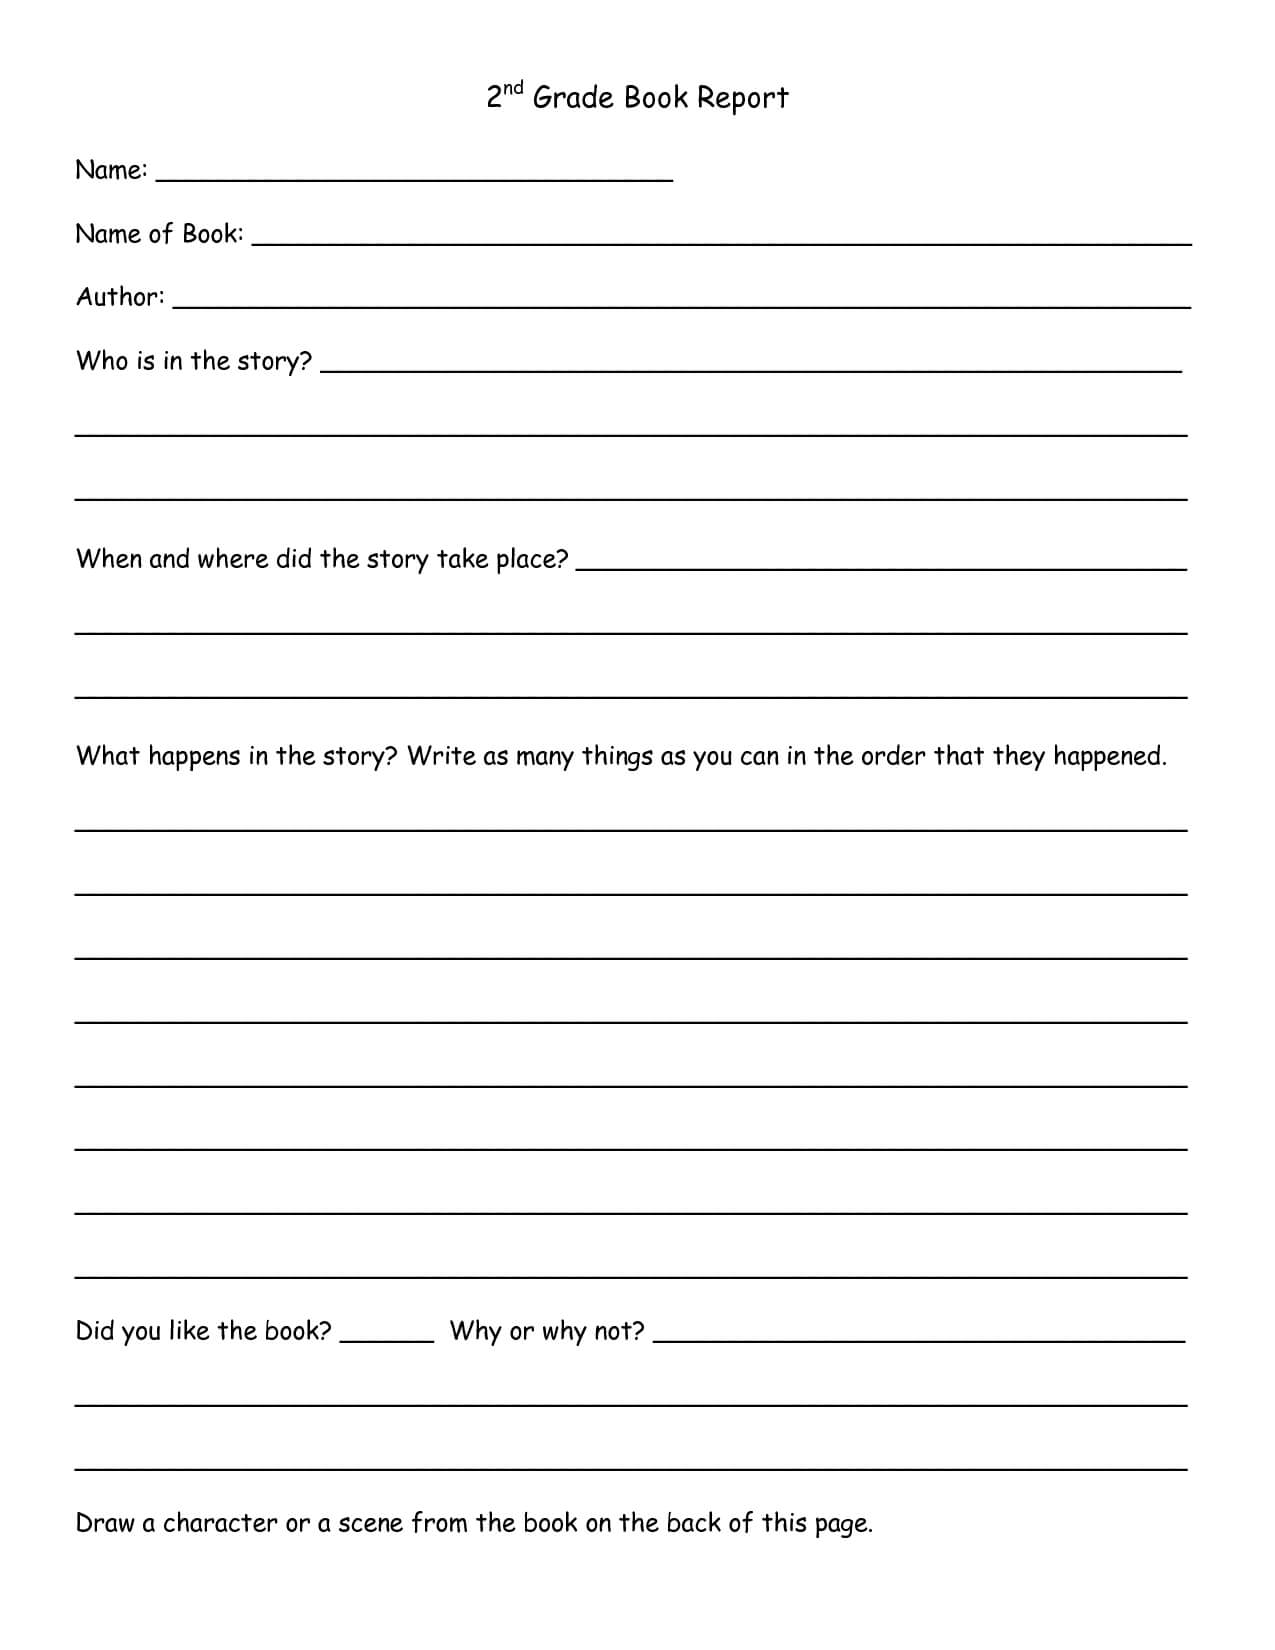 2Nd Grade Book Report Pdf | Book Report Templates, Grade Throughout Story Report Template